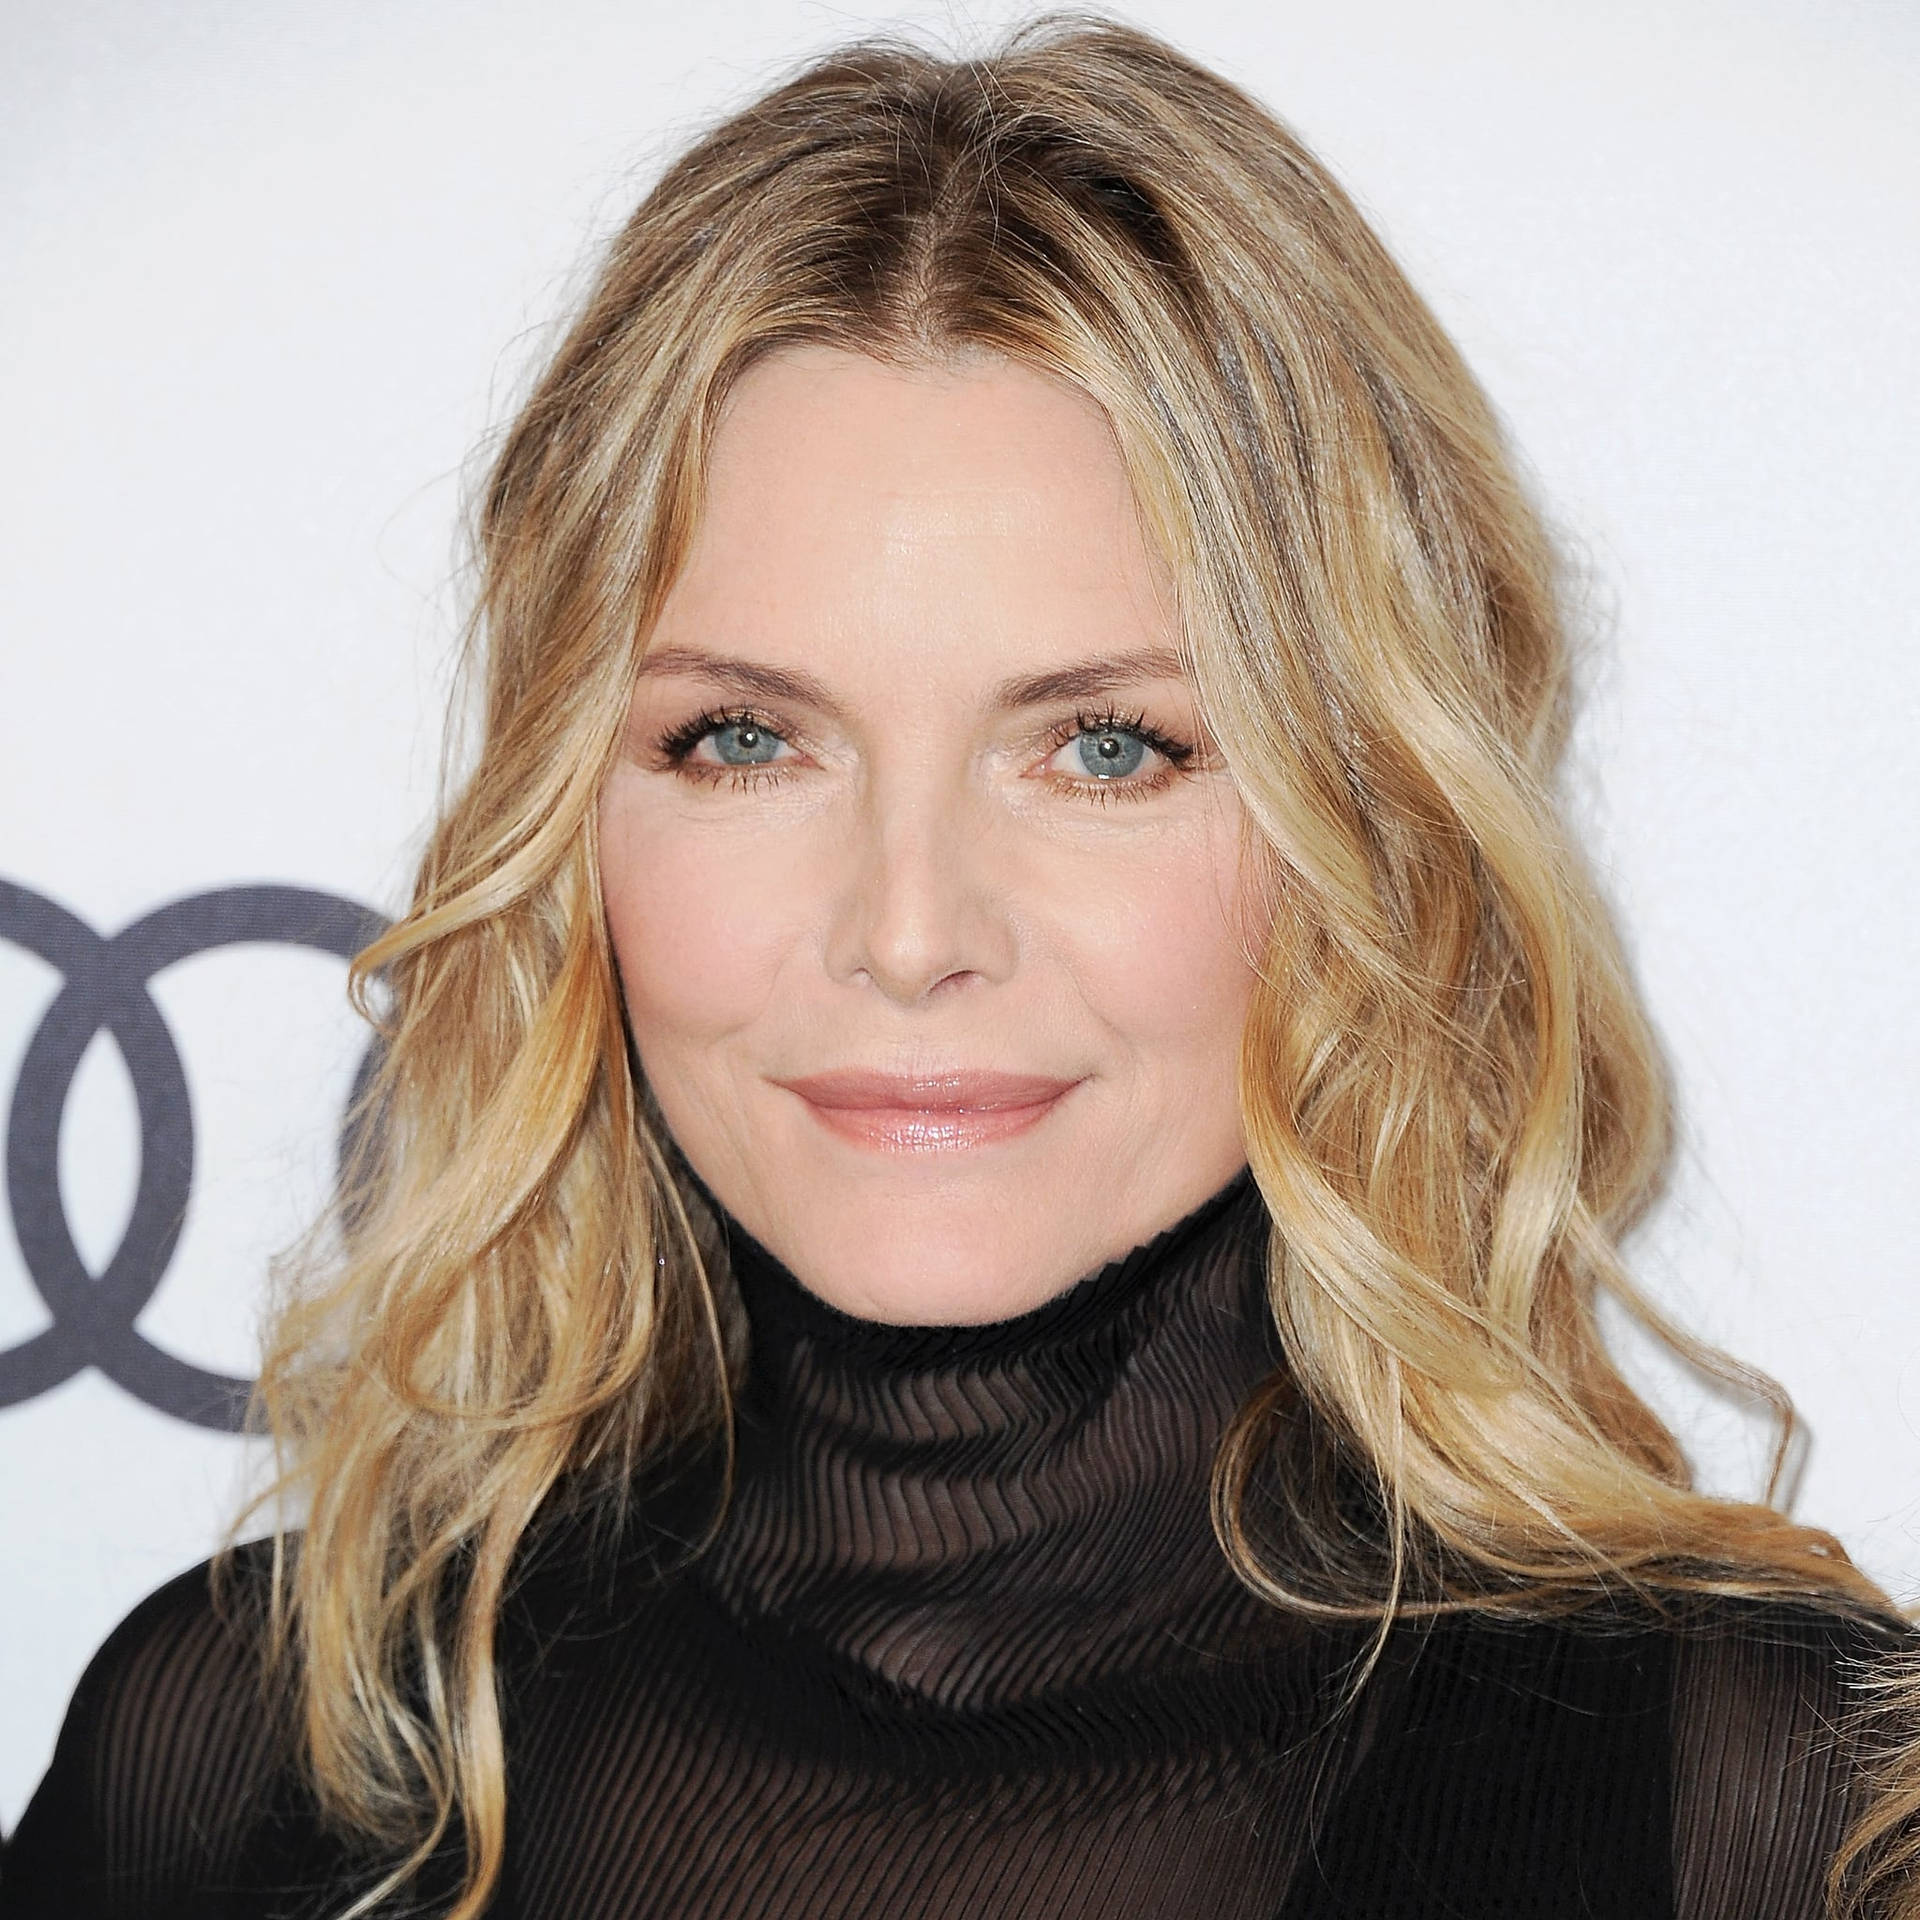 Hollywood icon Michelle Pfeiffer at the Variety Power of Women event Wallpaper